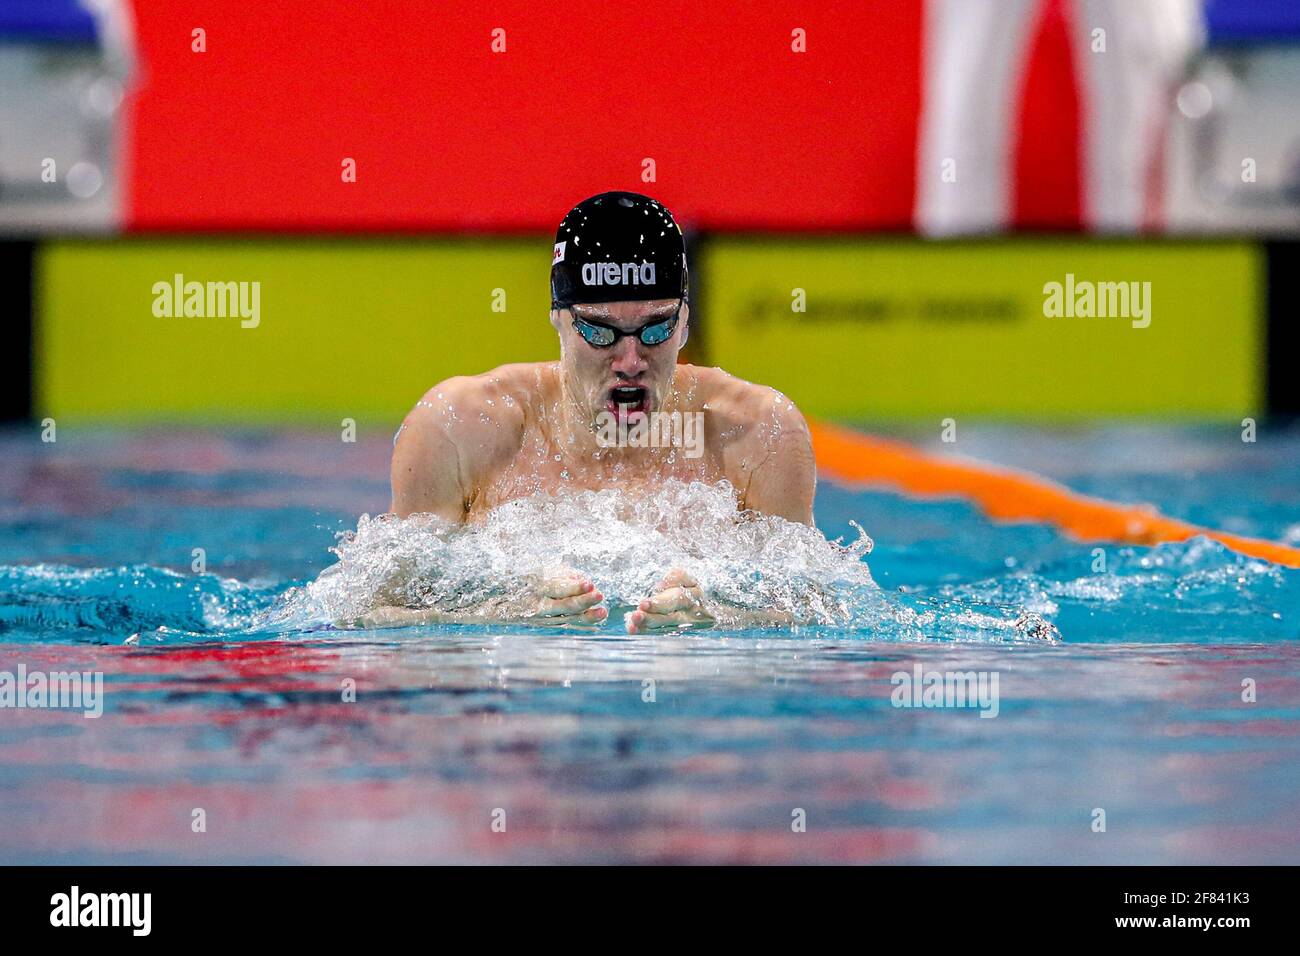 EINDHOVEN, NETHERLANDS - APRIL 11: Maximilian Pilger of Germany competing in the Men 200m Breaststroke finals during the Eindhoven Qualification Meet Stock Photo